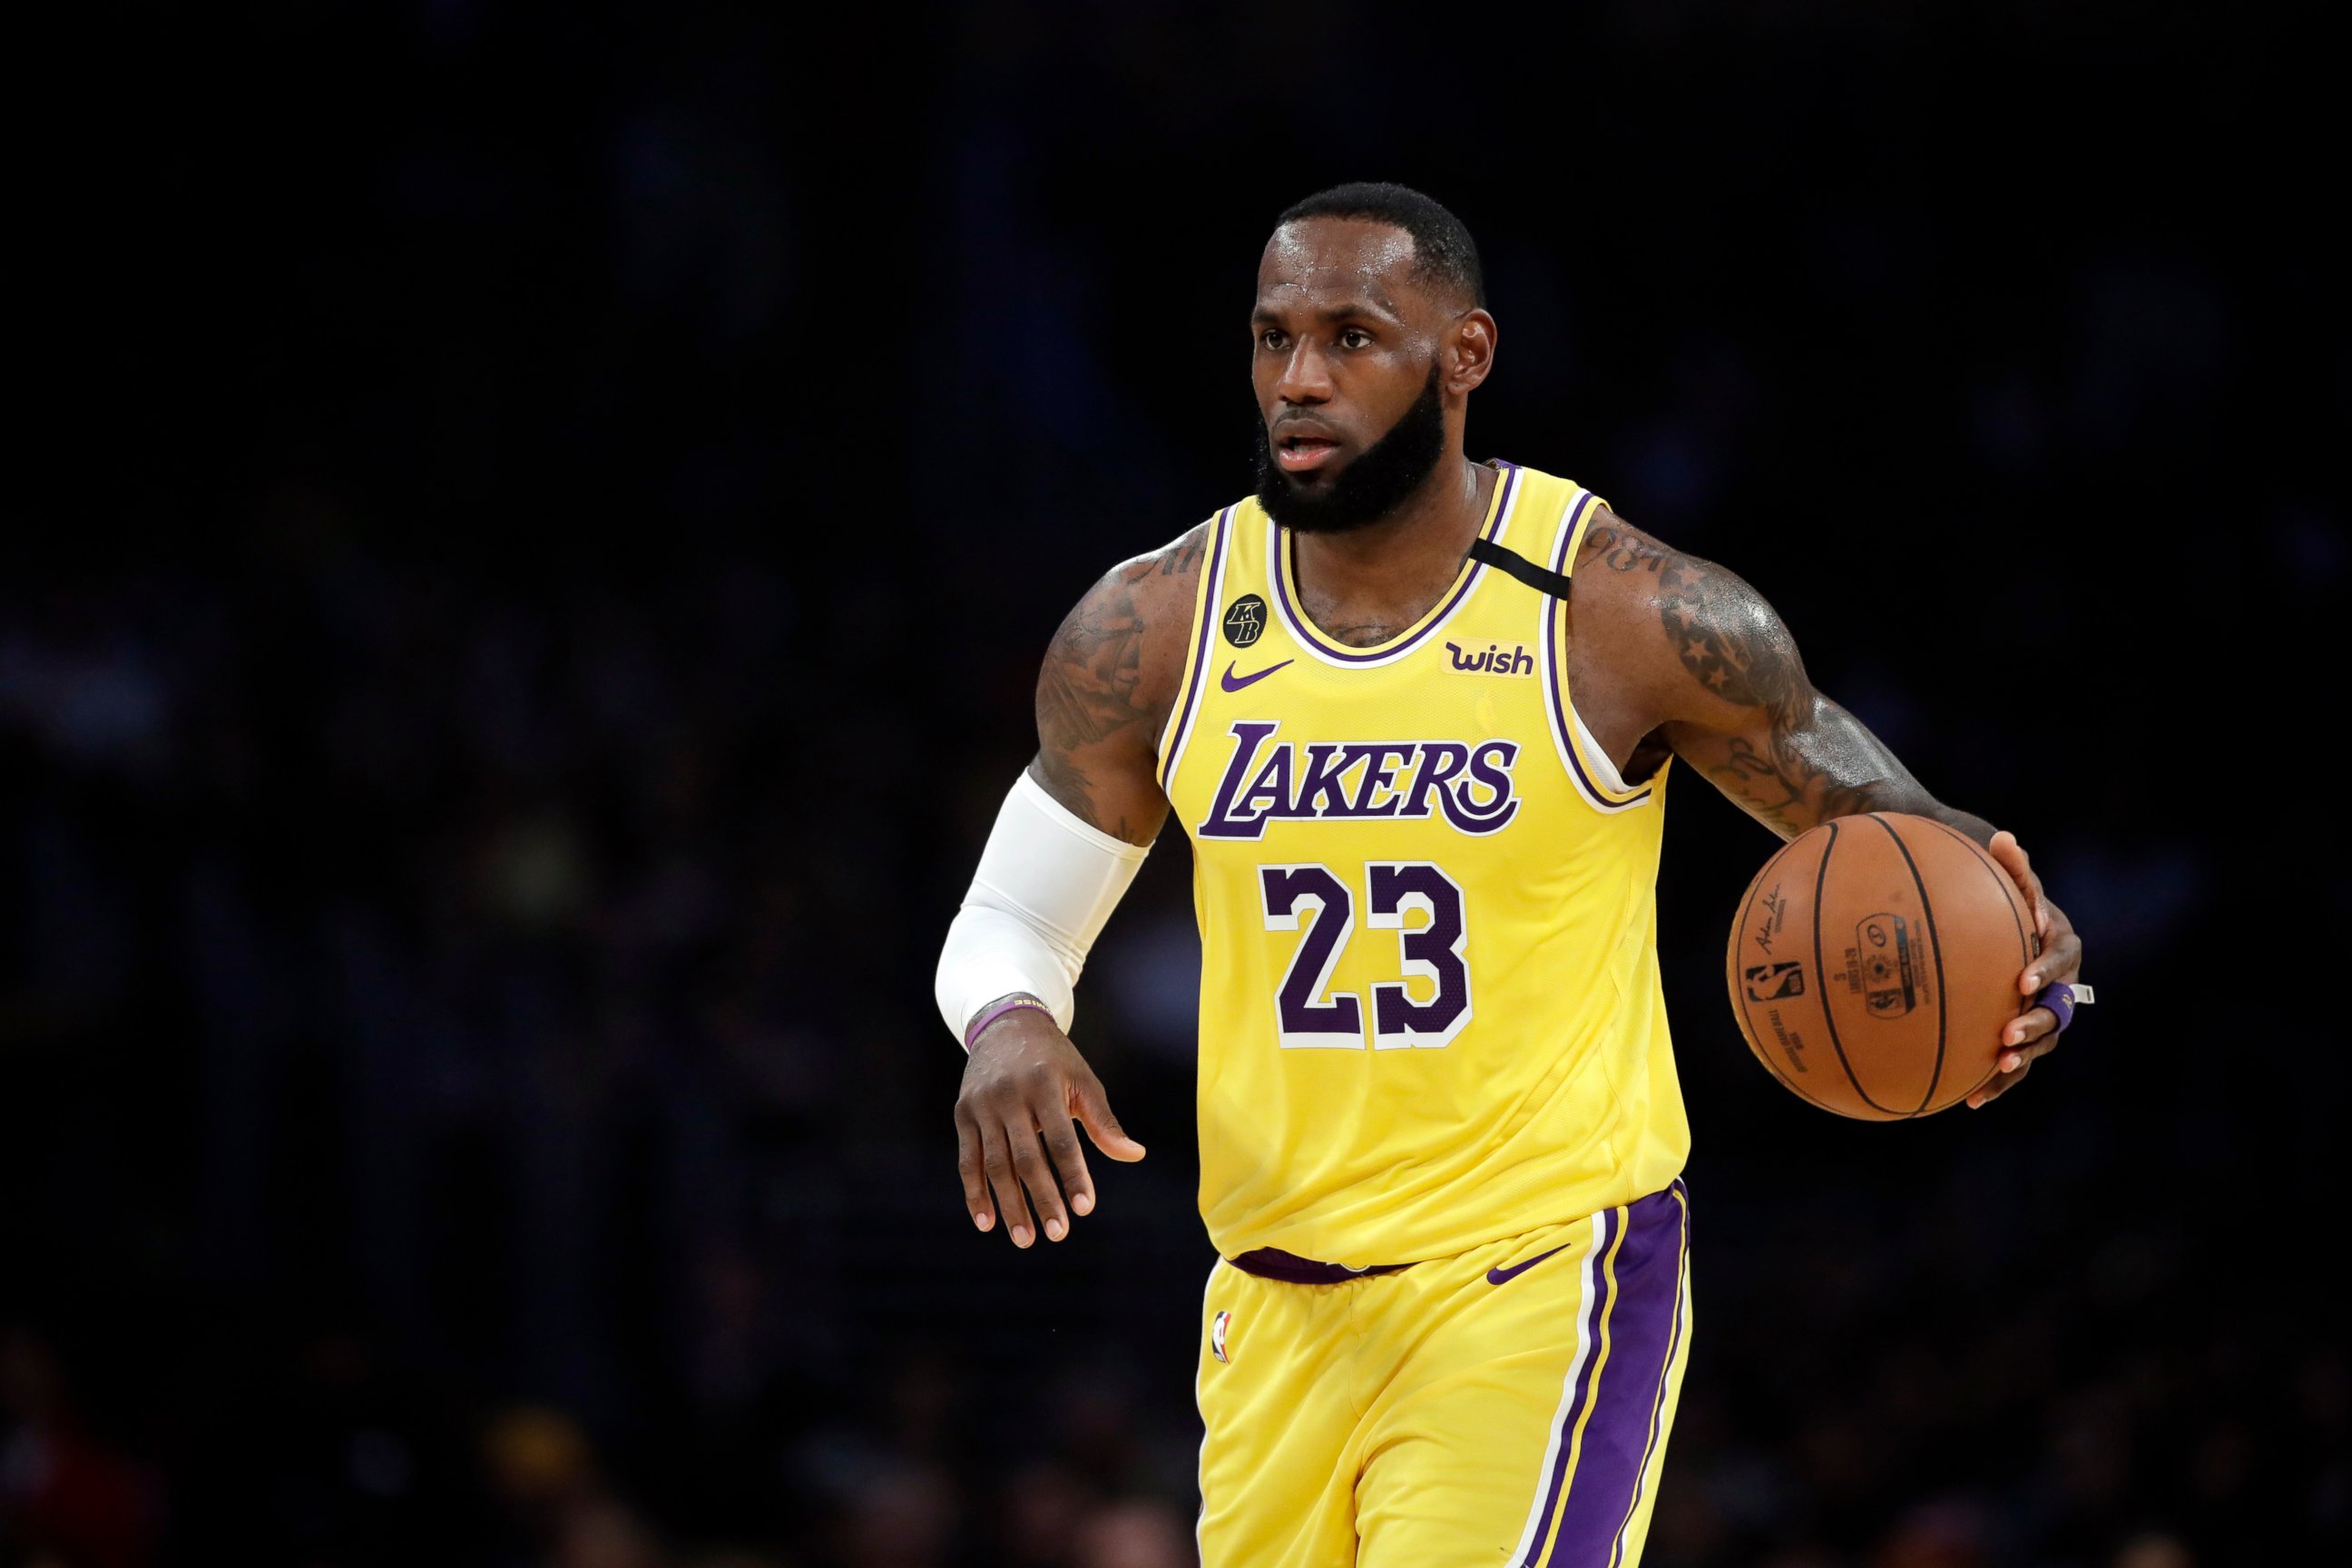 PHOTO: In this March 10, 2020, file photo, Los Angeles Lakers' LeBron James dribbles during the first half of an NBA basketball game against the Brooklyn Nets in Los Angeles.